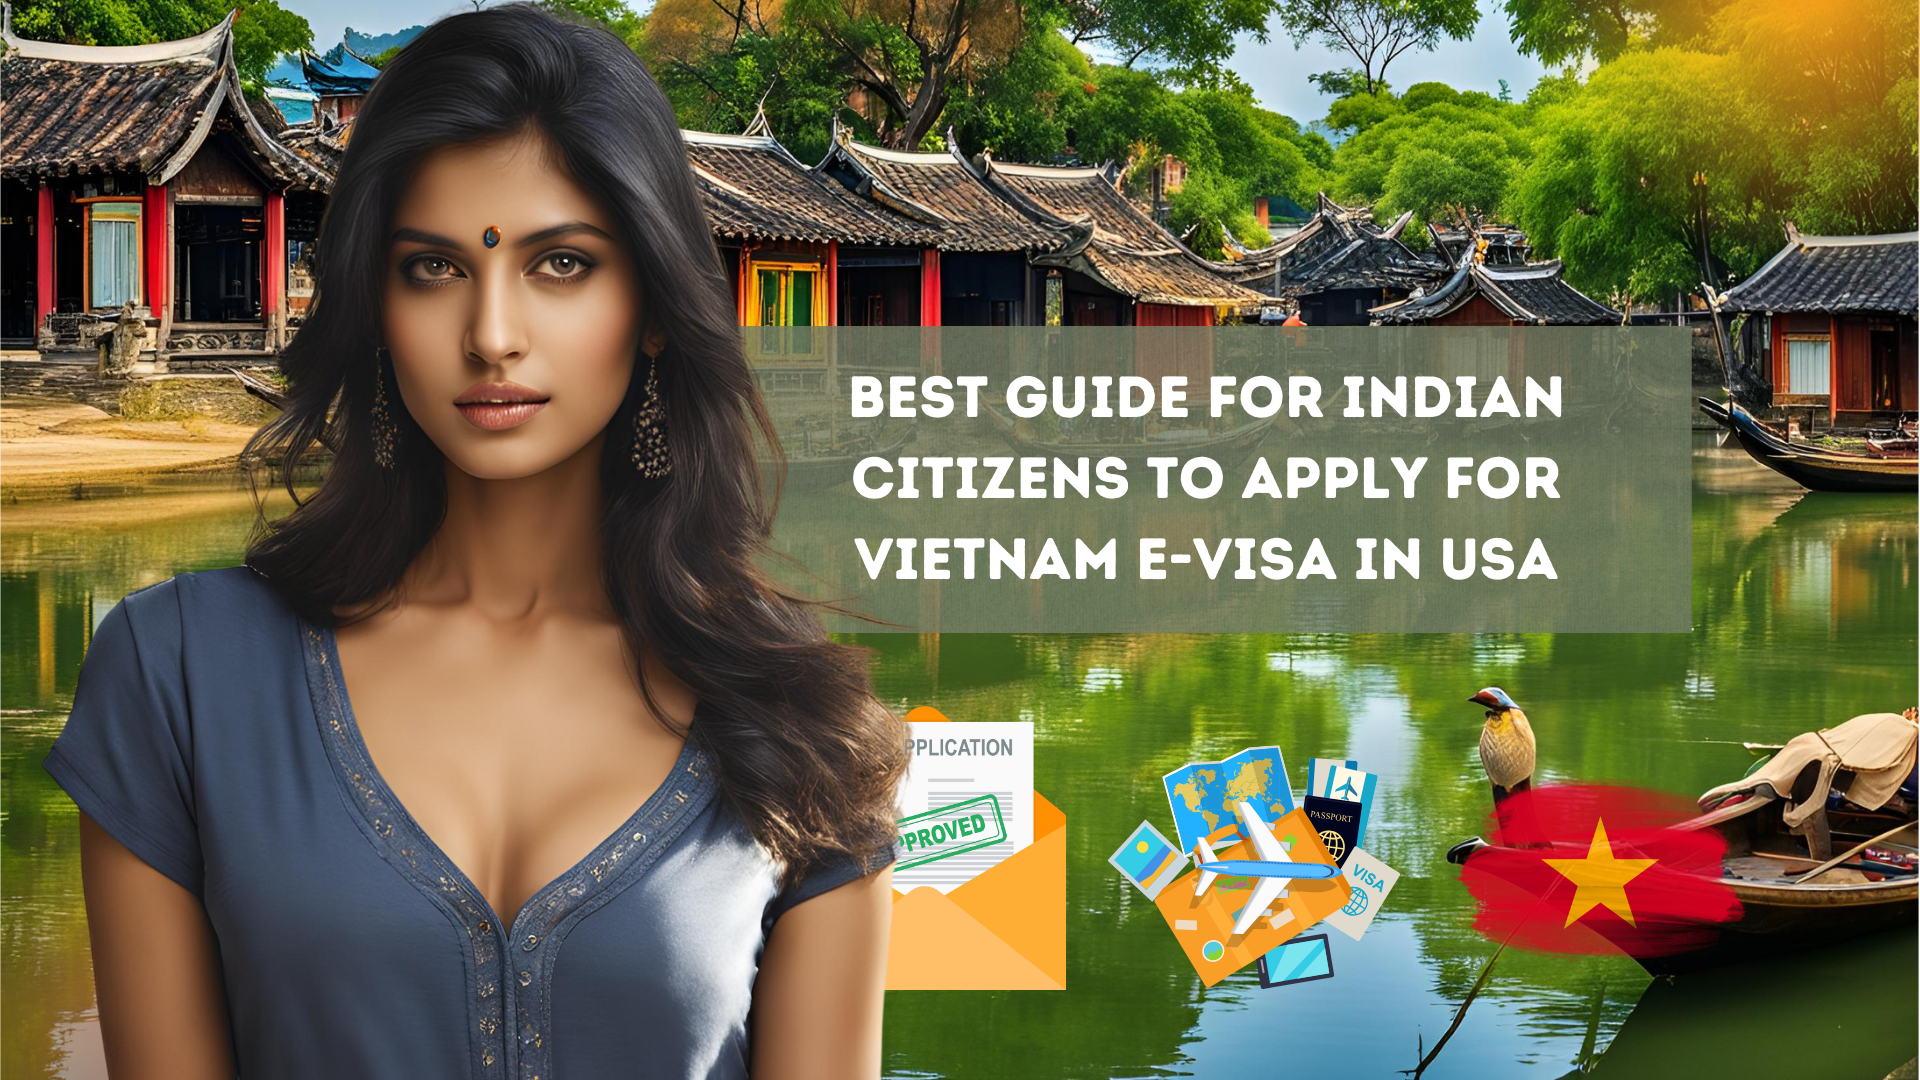 Best Guide for Indian Citizens to Apply for Vietnam E-Visa in USA